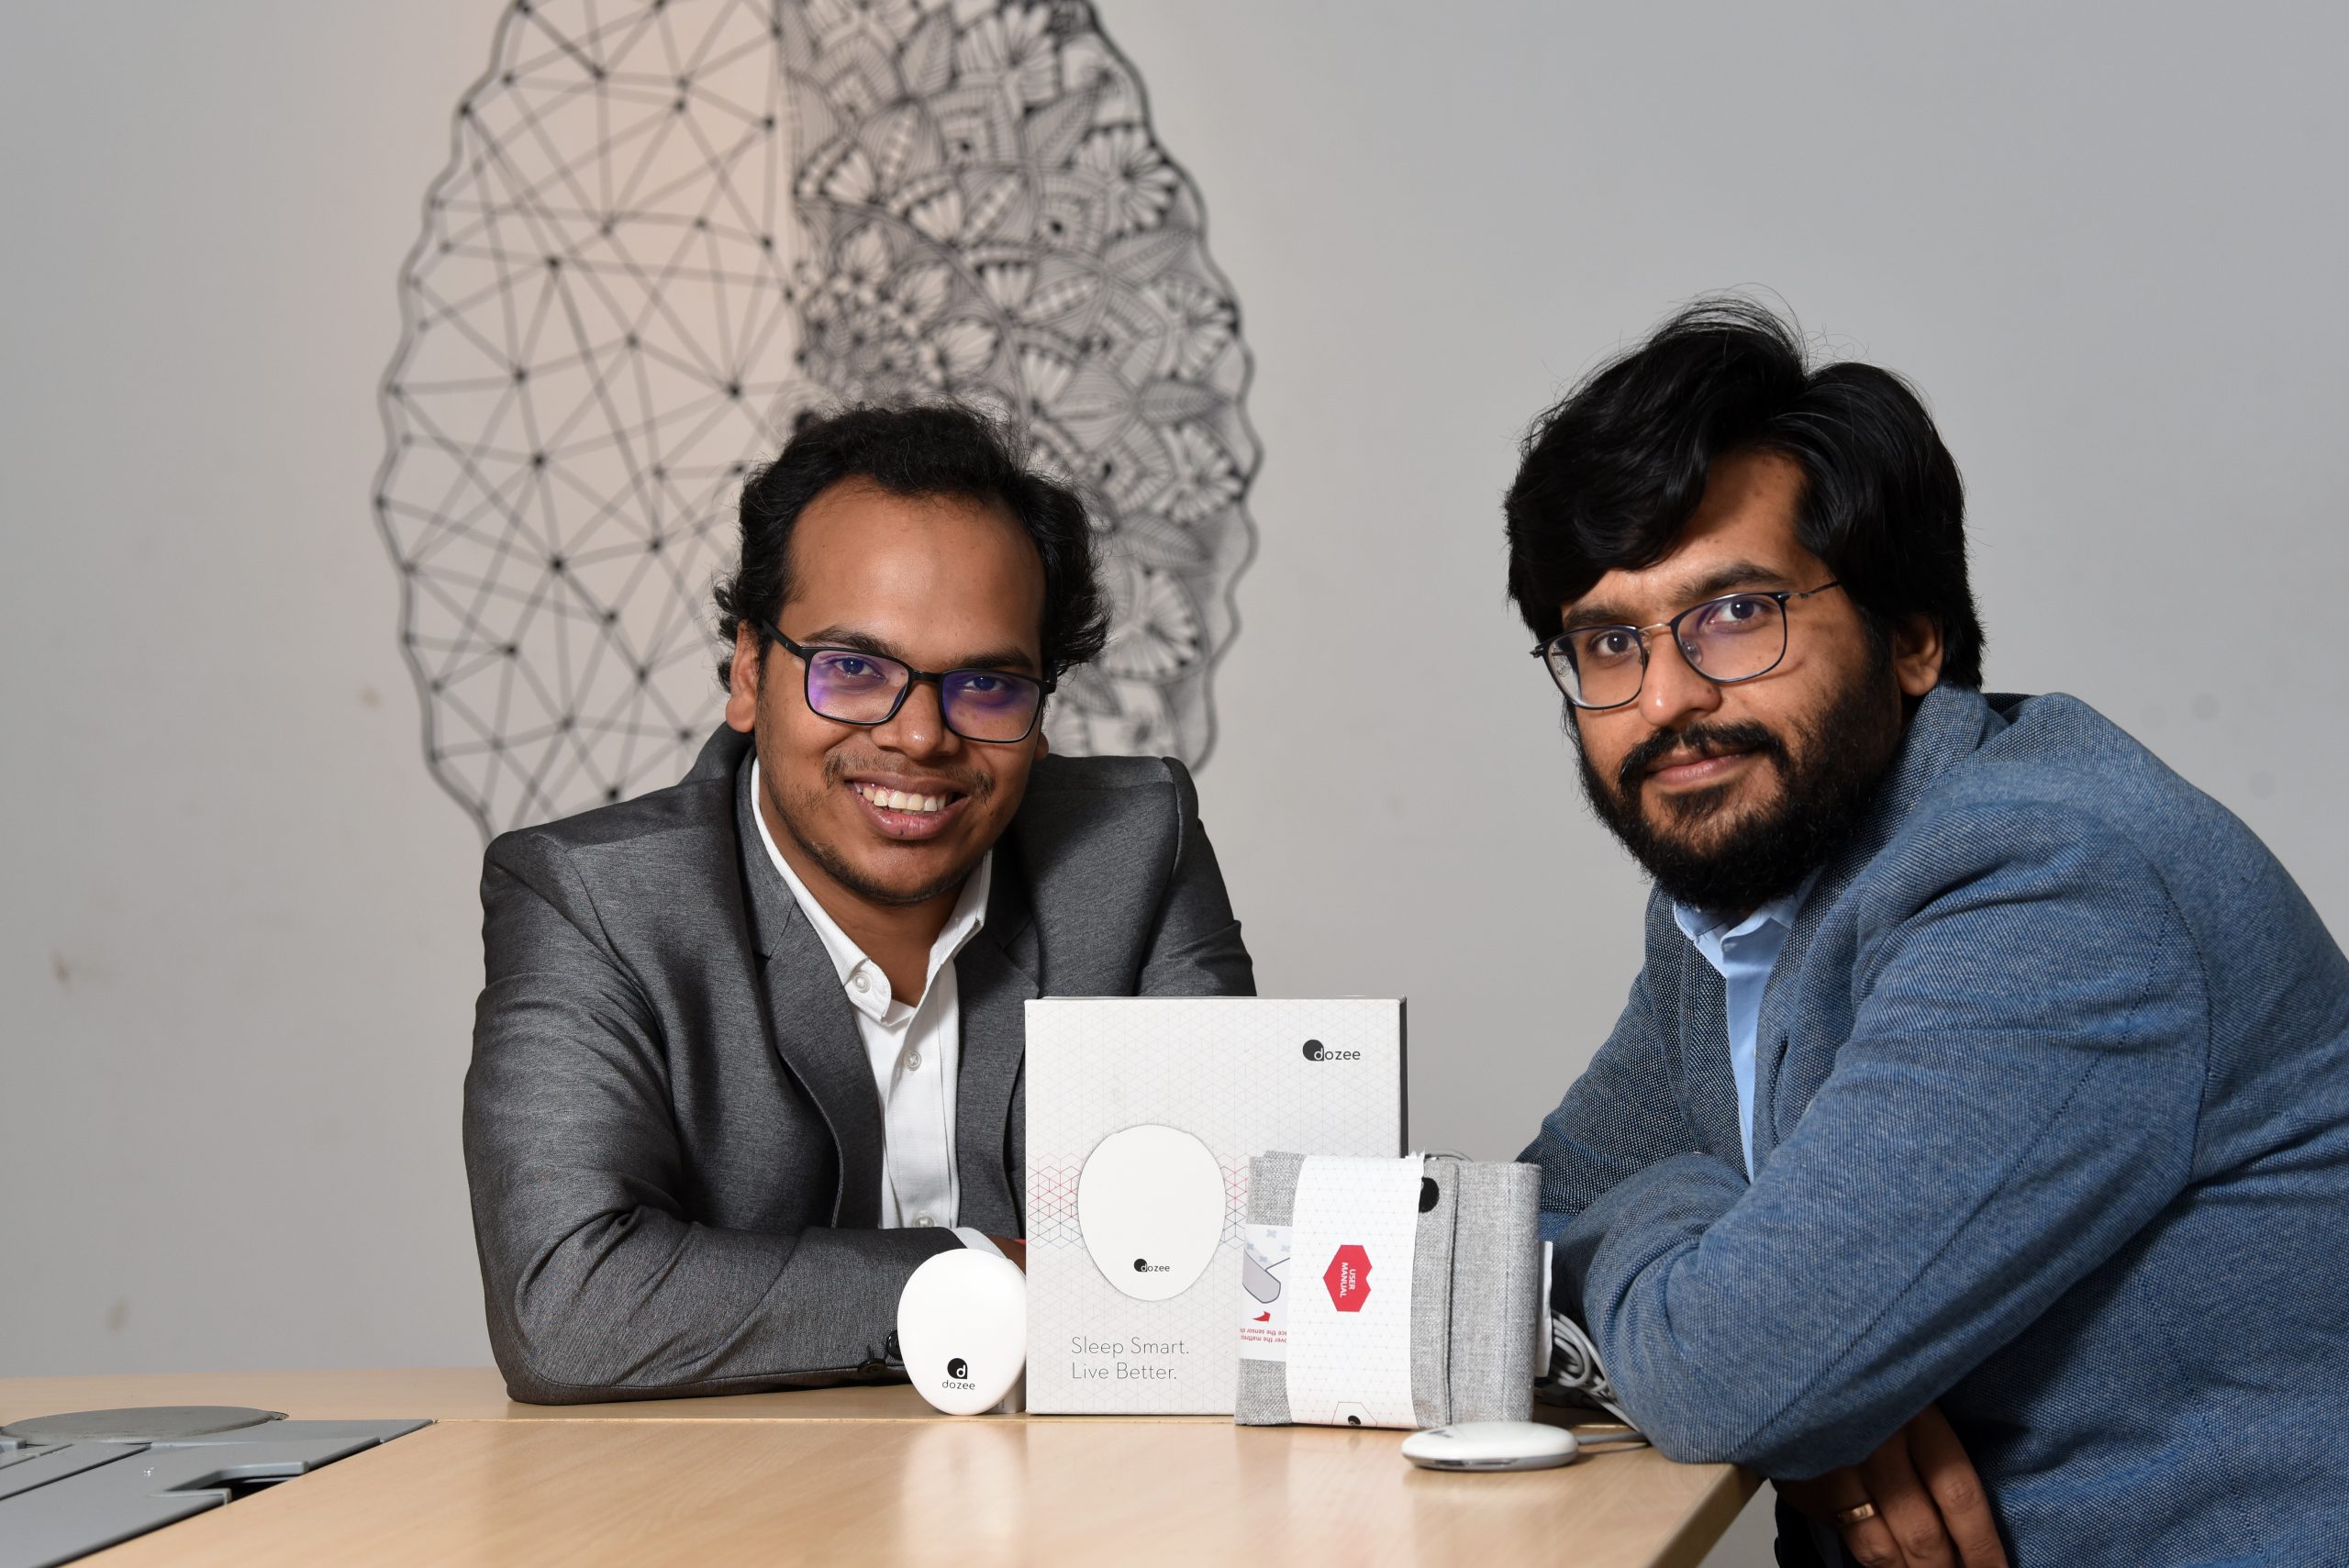 Dozee detects early signs of deteriorating health | Startup Stories